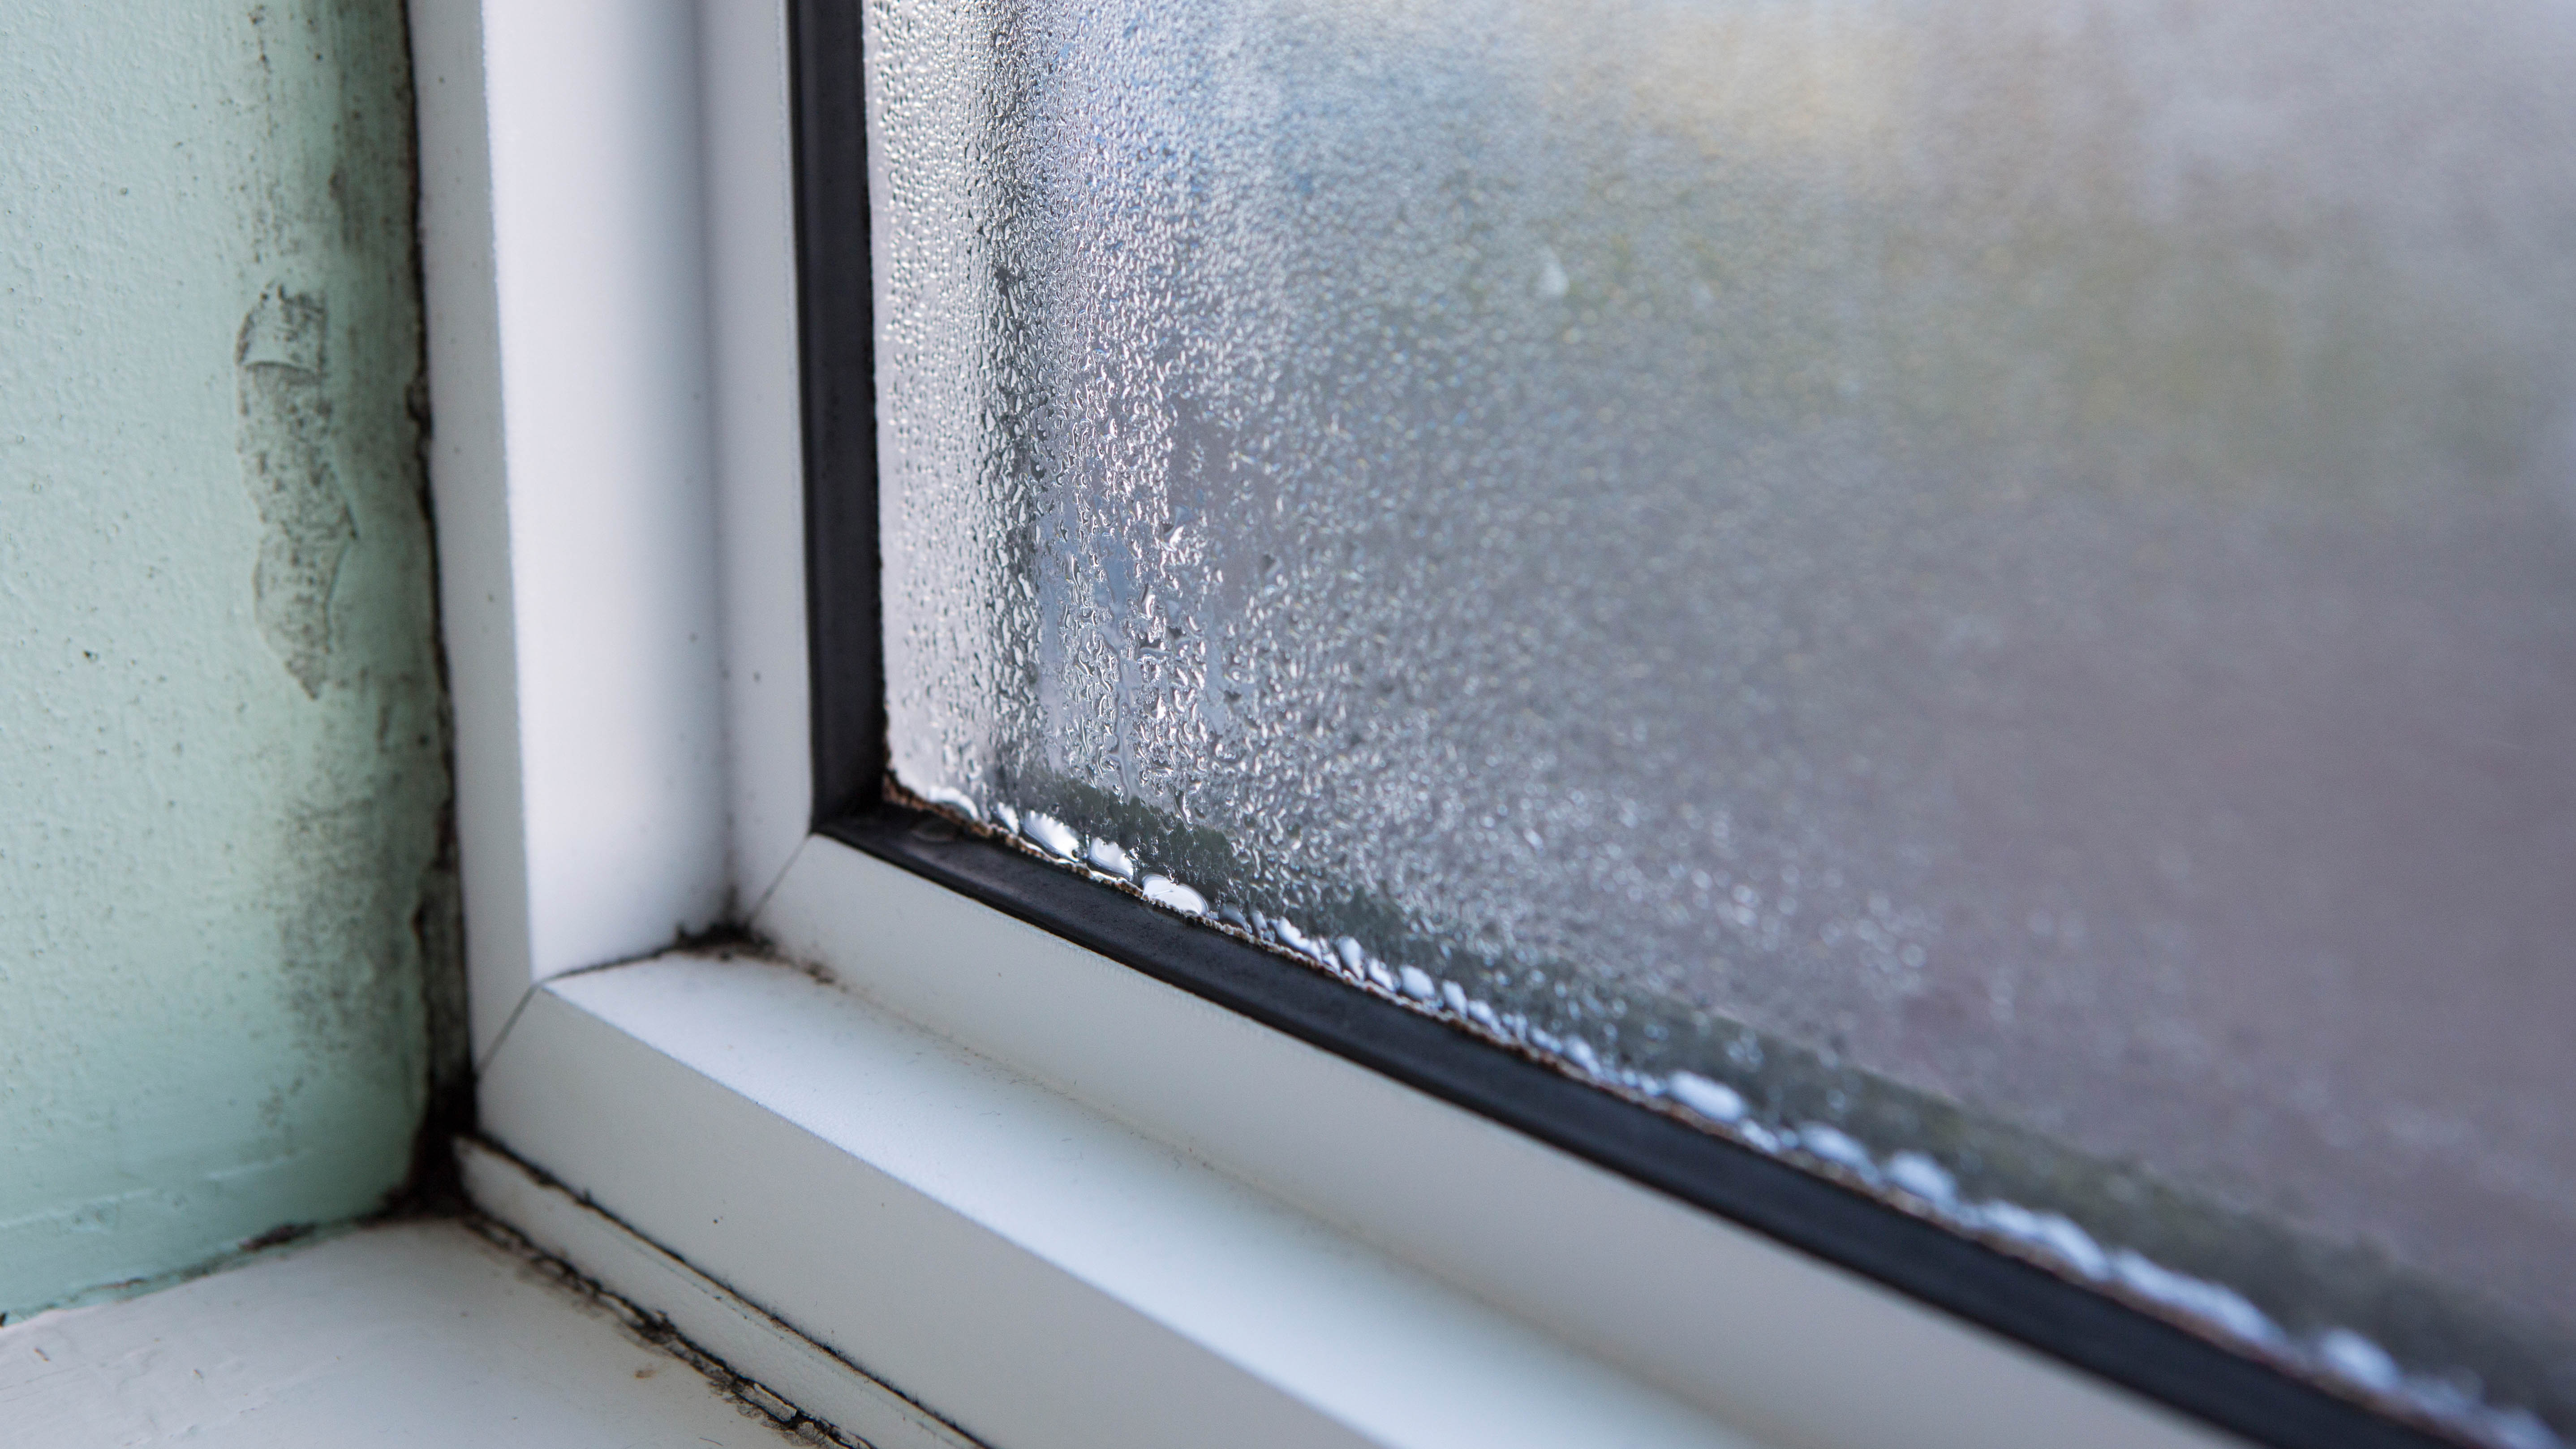 I'm a property expert - here's an easy way to remove condensation from  bedroom windows in the morning